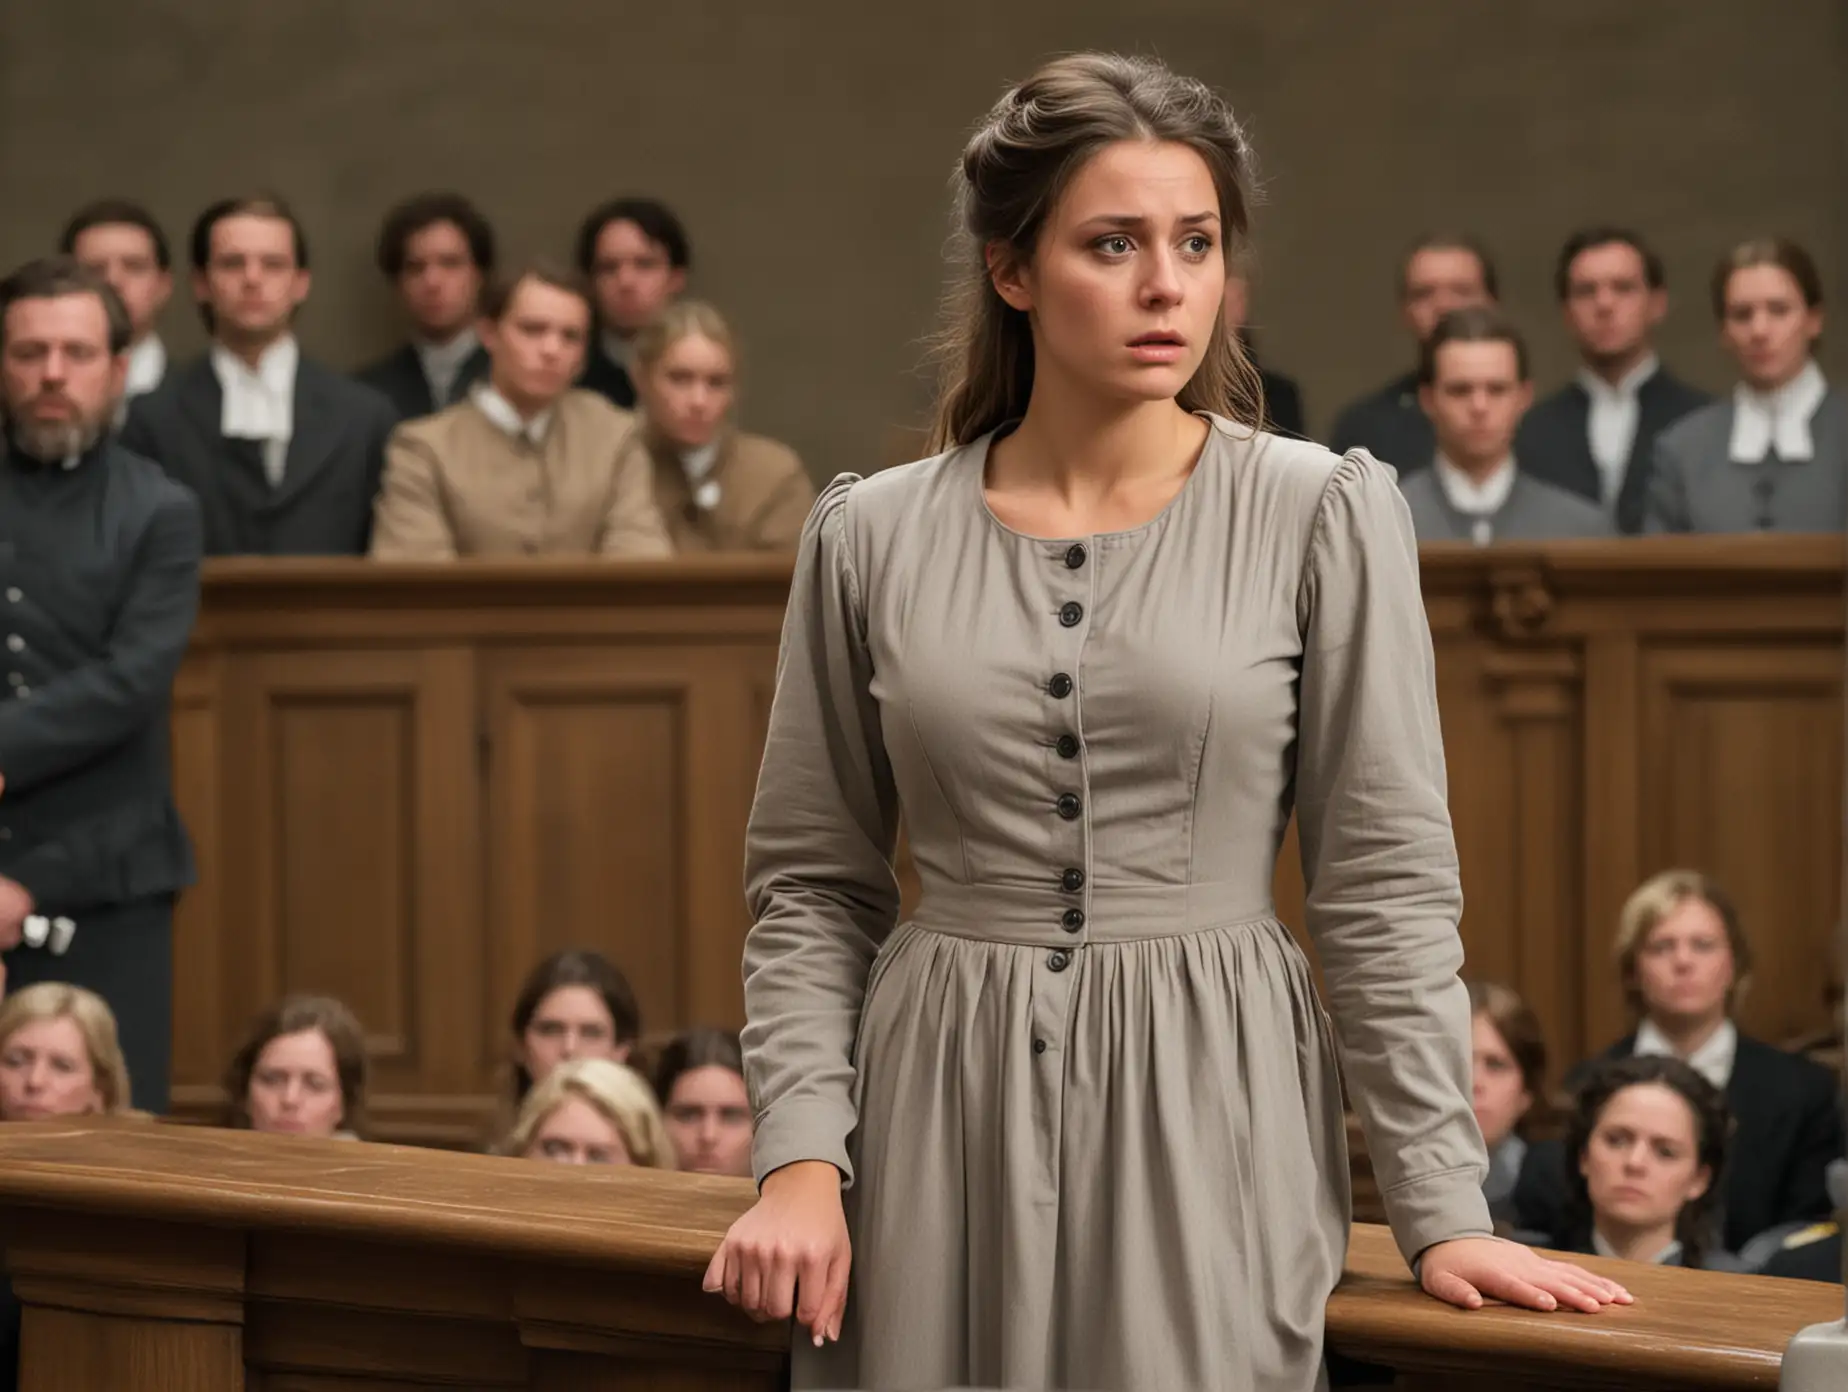 A busty female prisoner (german, 25 years old) stand on a pulpit before the court on her trial (1800s) in worn light-gray buttoned longsleeve collarless prisonerdress(round-neckline, medium hair), head to knee view, She is very sad and desperate, head down
Angry audience sit behind her in brown-beige clothes